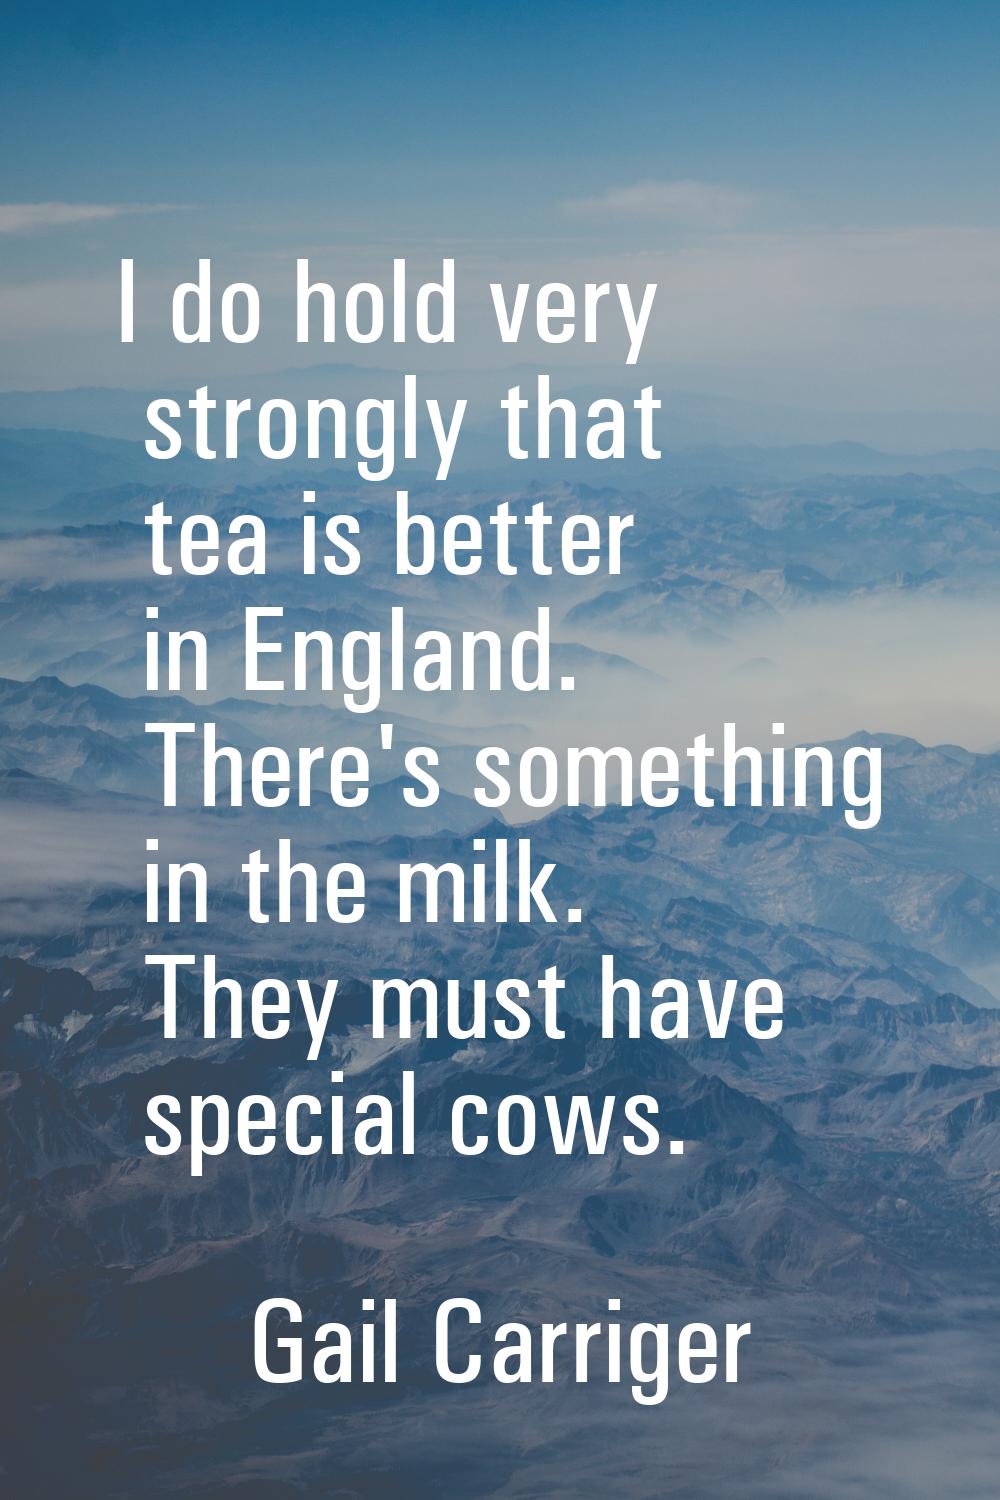 I do hold very strongly that tea is better in England. There's something in the milk. They must hav